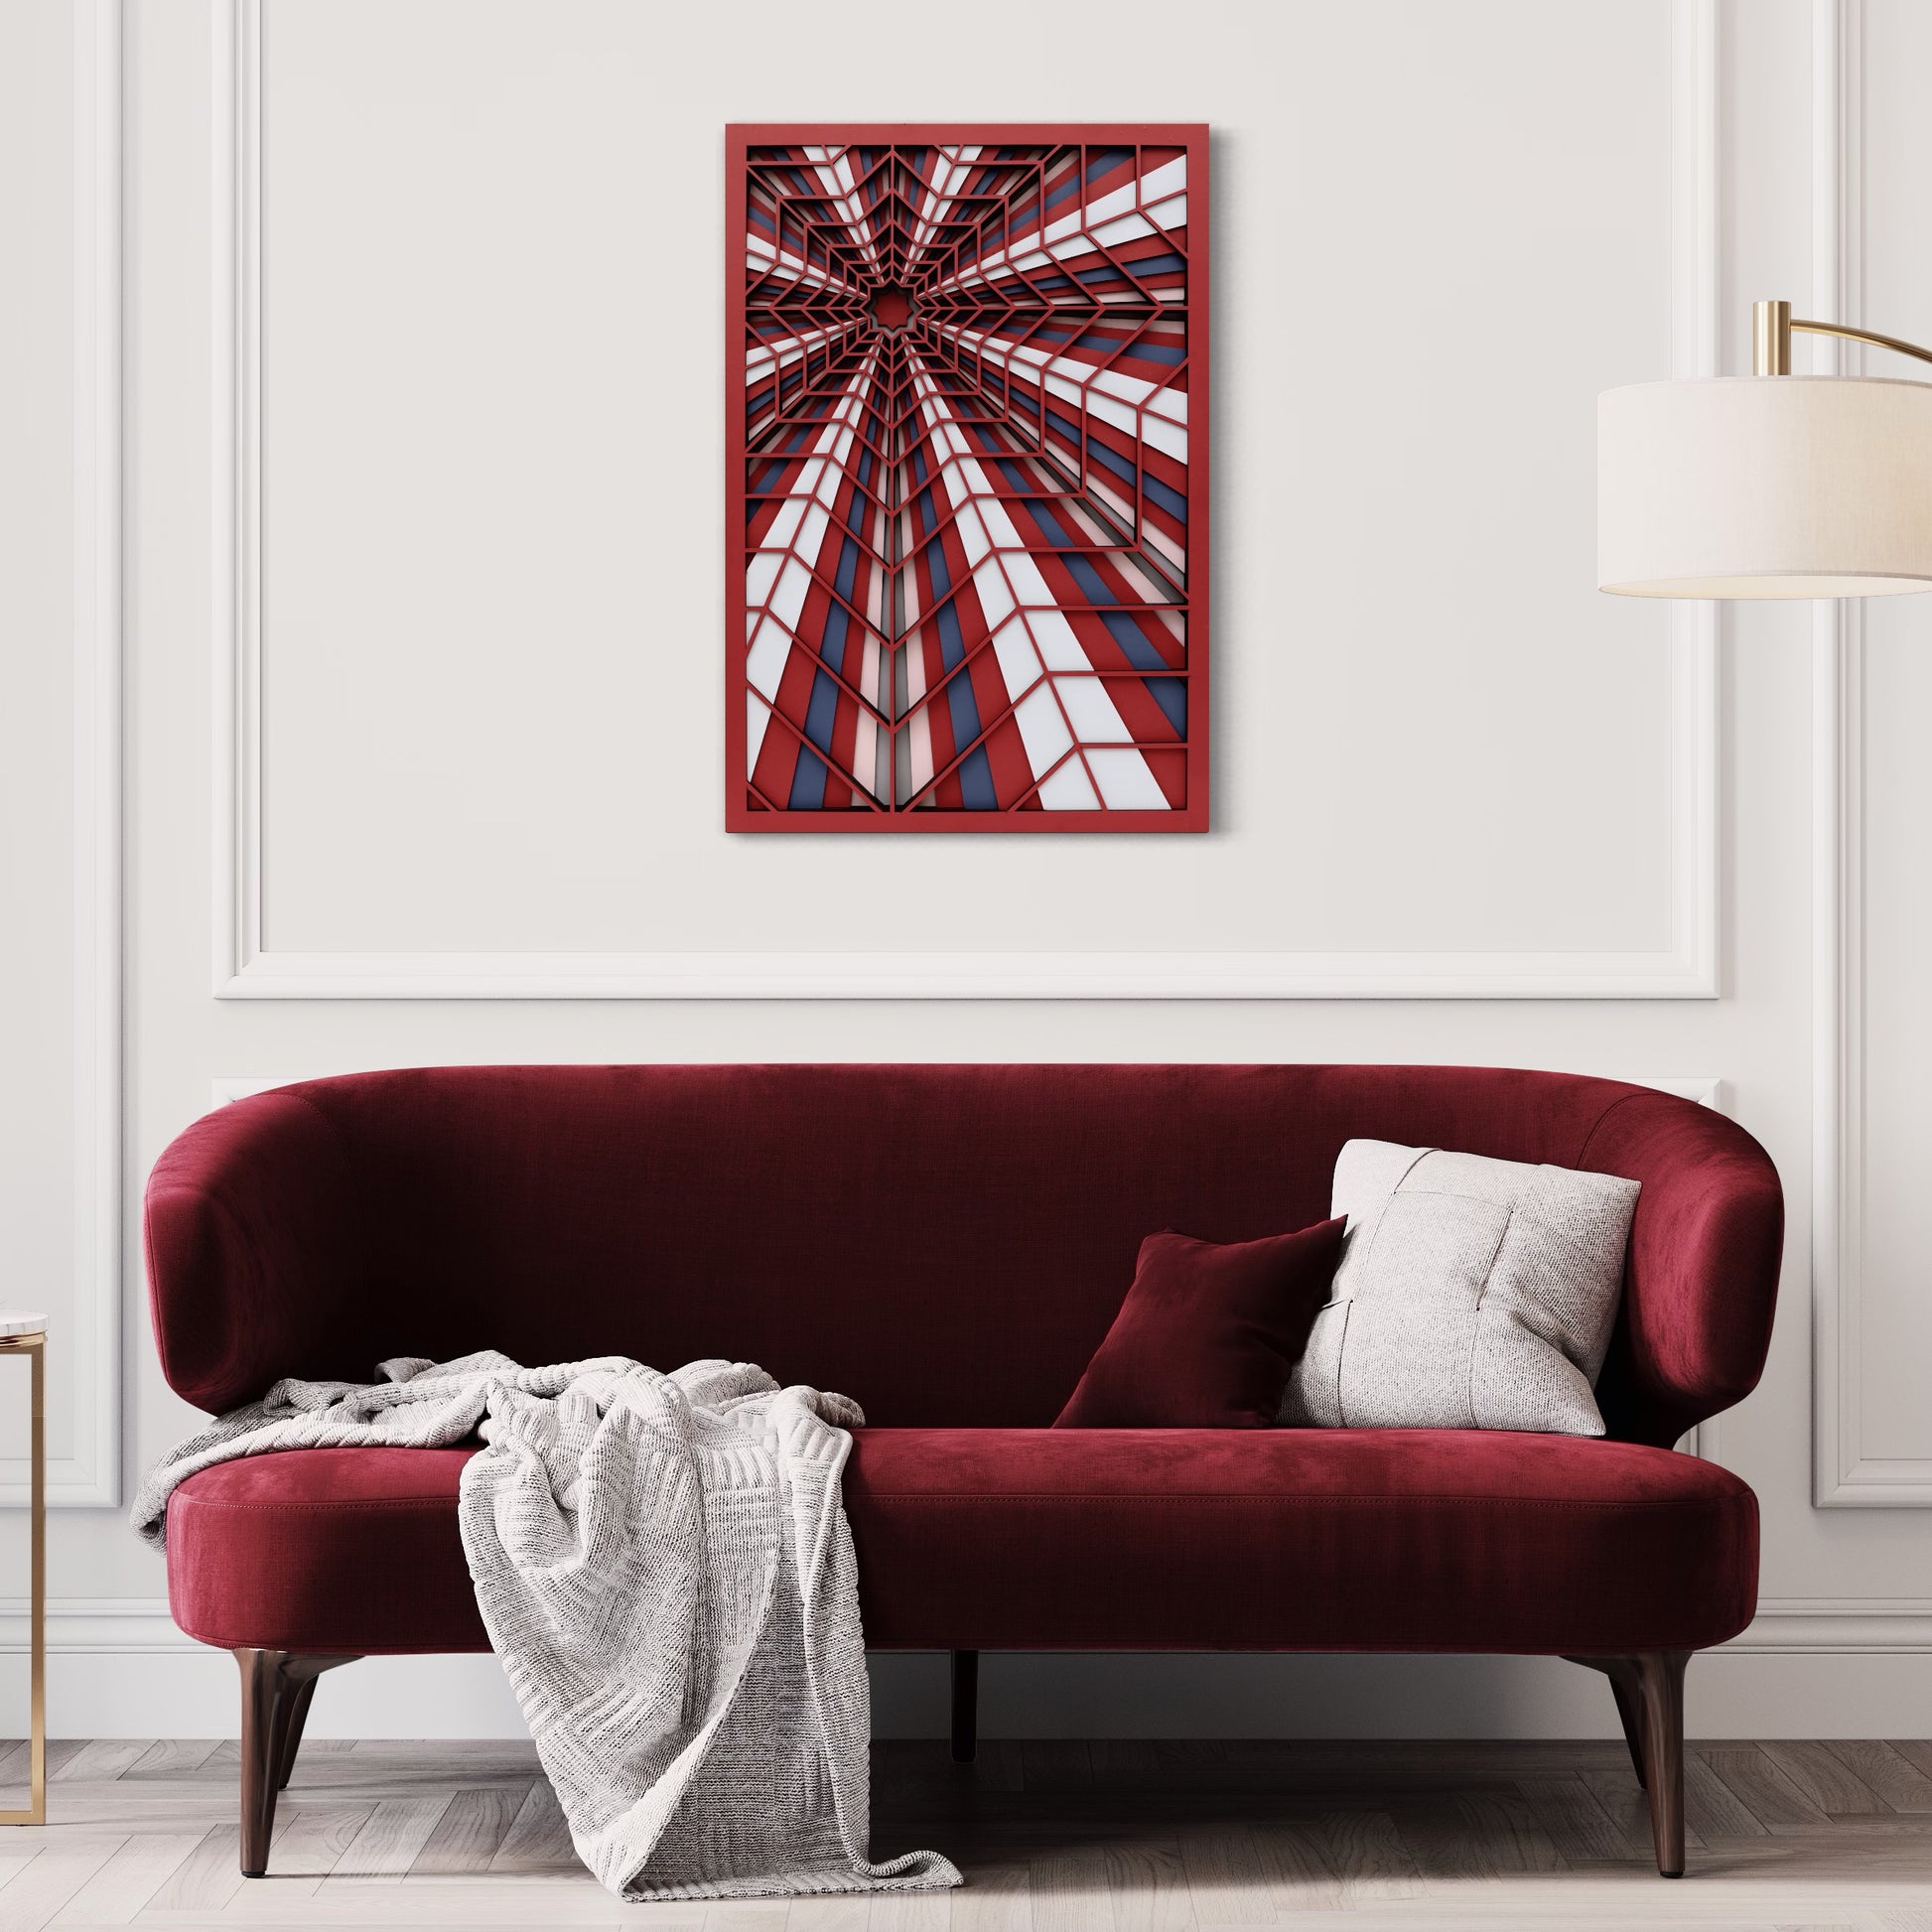 Perception Wood Wall Art | Color Dull Red, Coral Blue, Mid Grey And Hit Grey